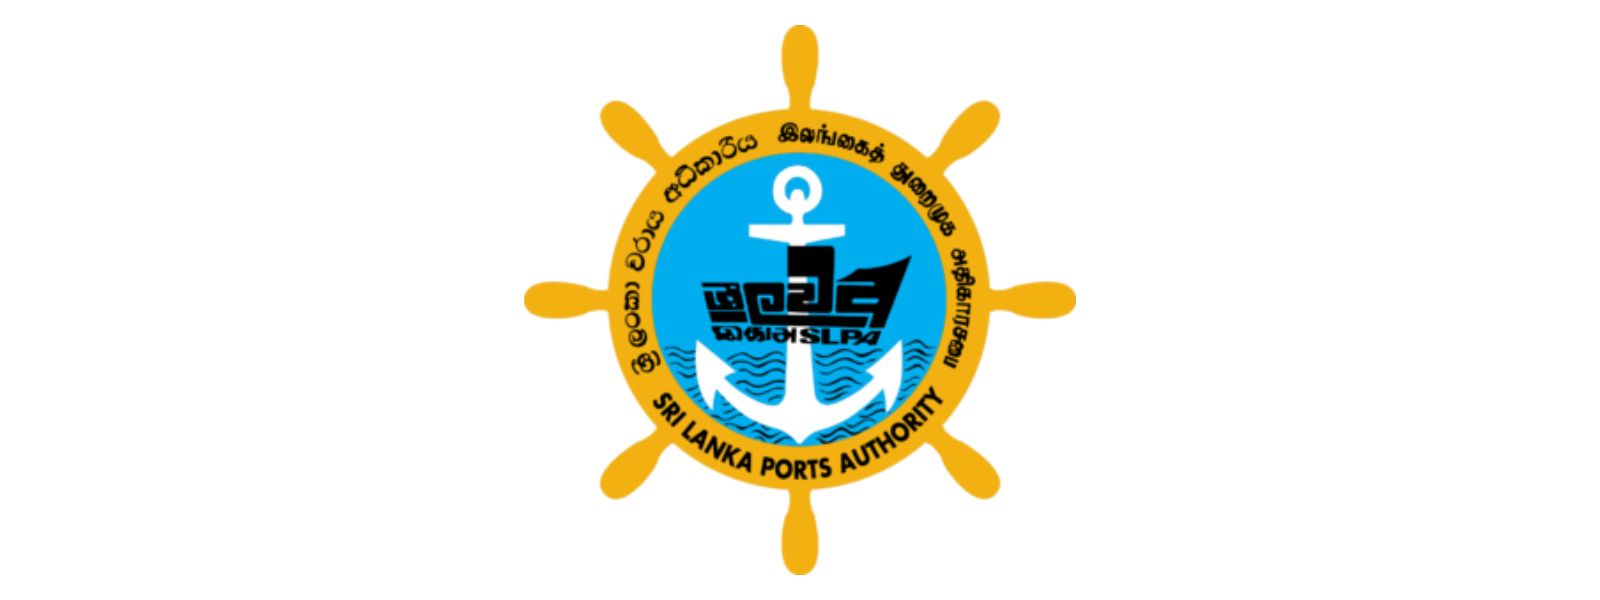 Mannar Port declared under Ports Authority Act